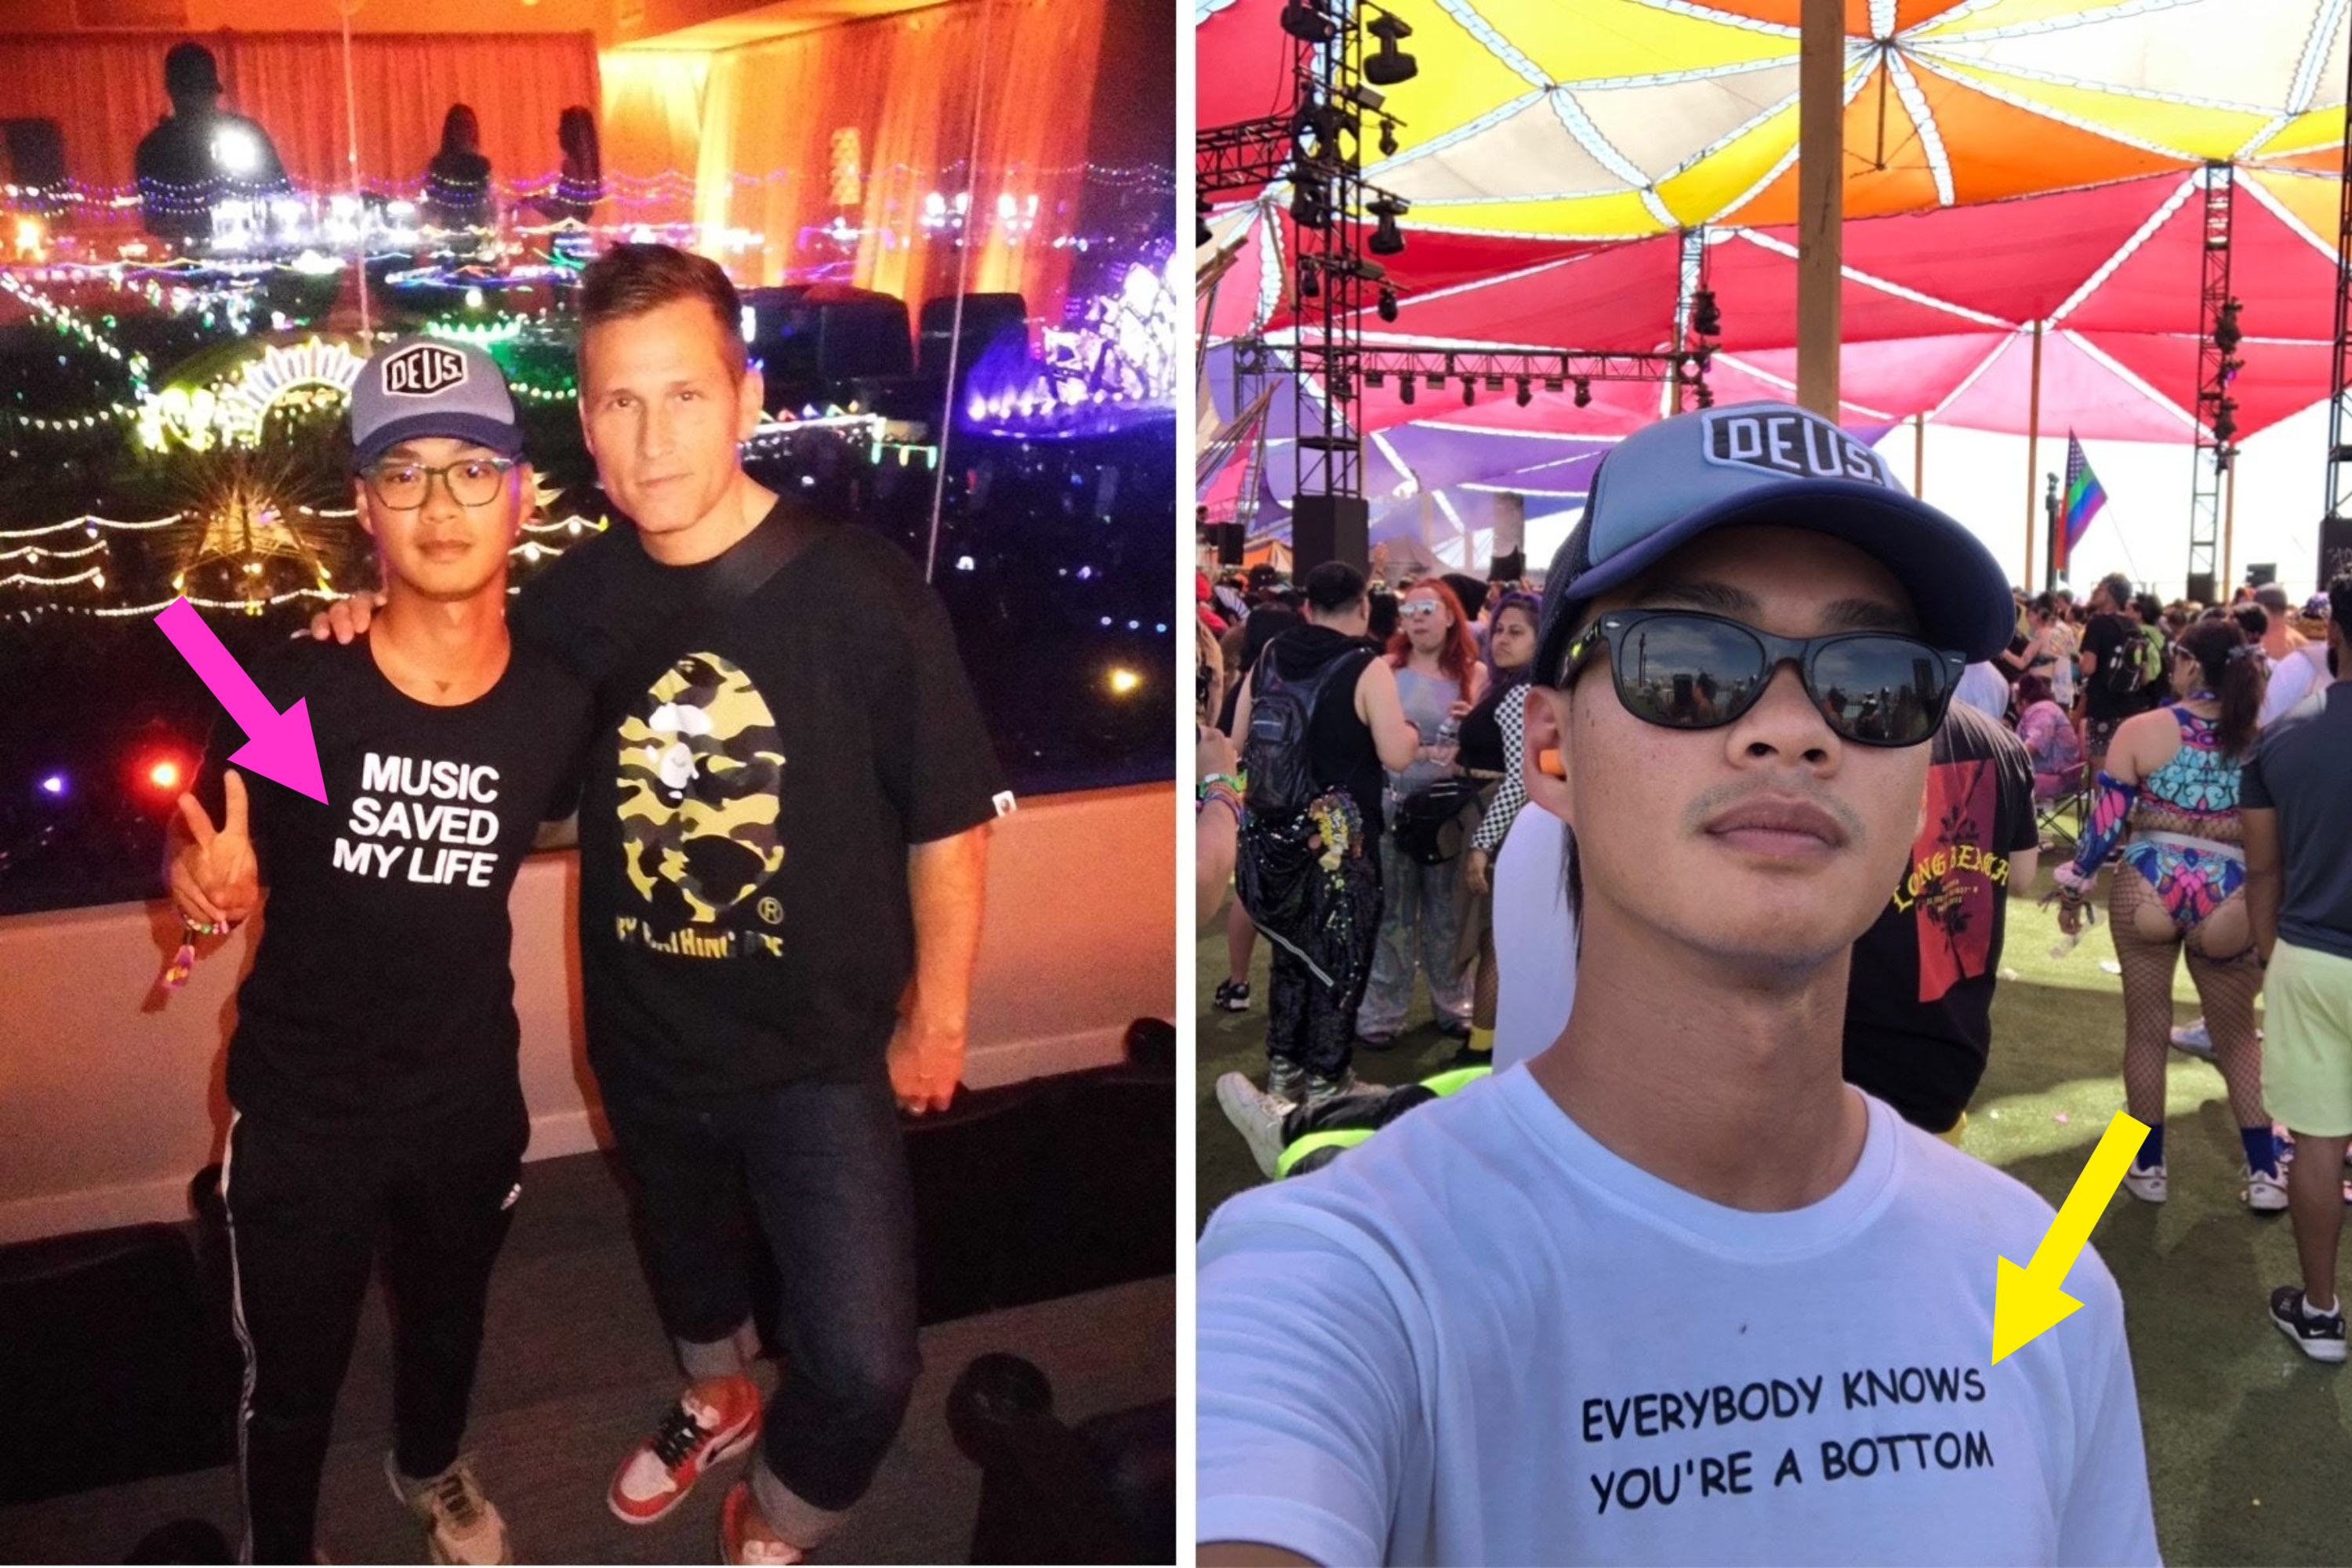 (left) author with t-shirt that says &#x27;music saved my life&#x27; next to kaskade (right) author wearing shirt that says &#x27;everybody knows you&#x27;re a bottom&#x27;